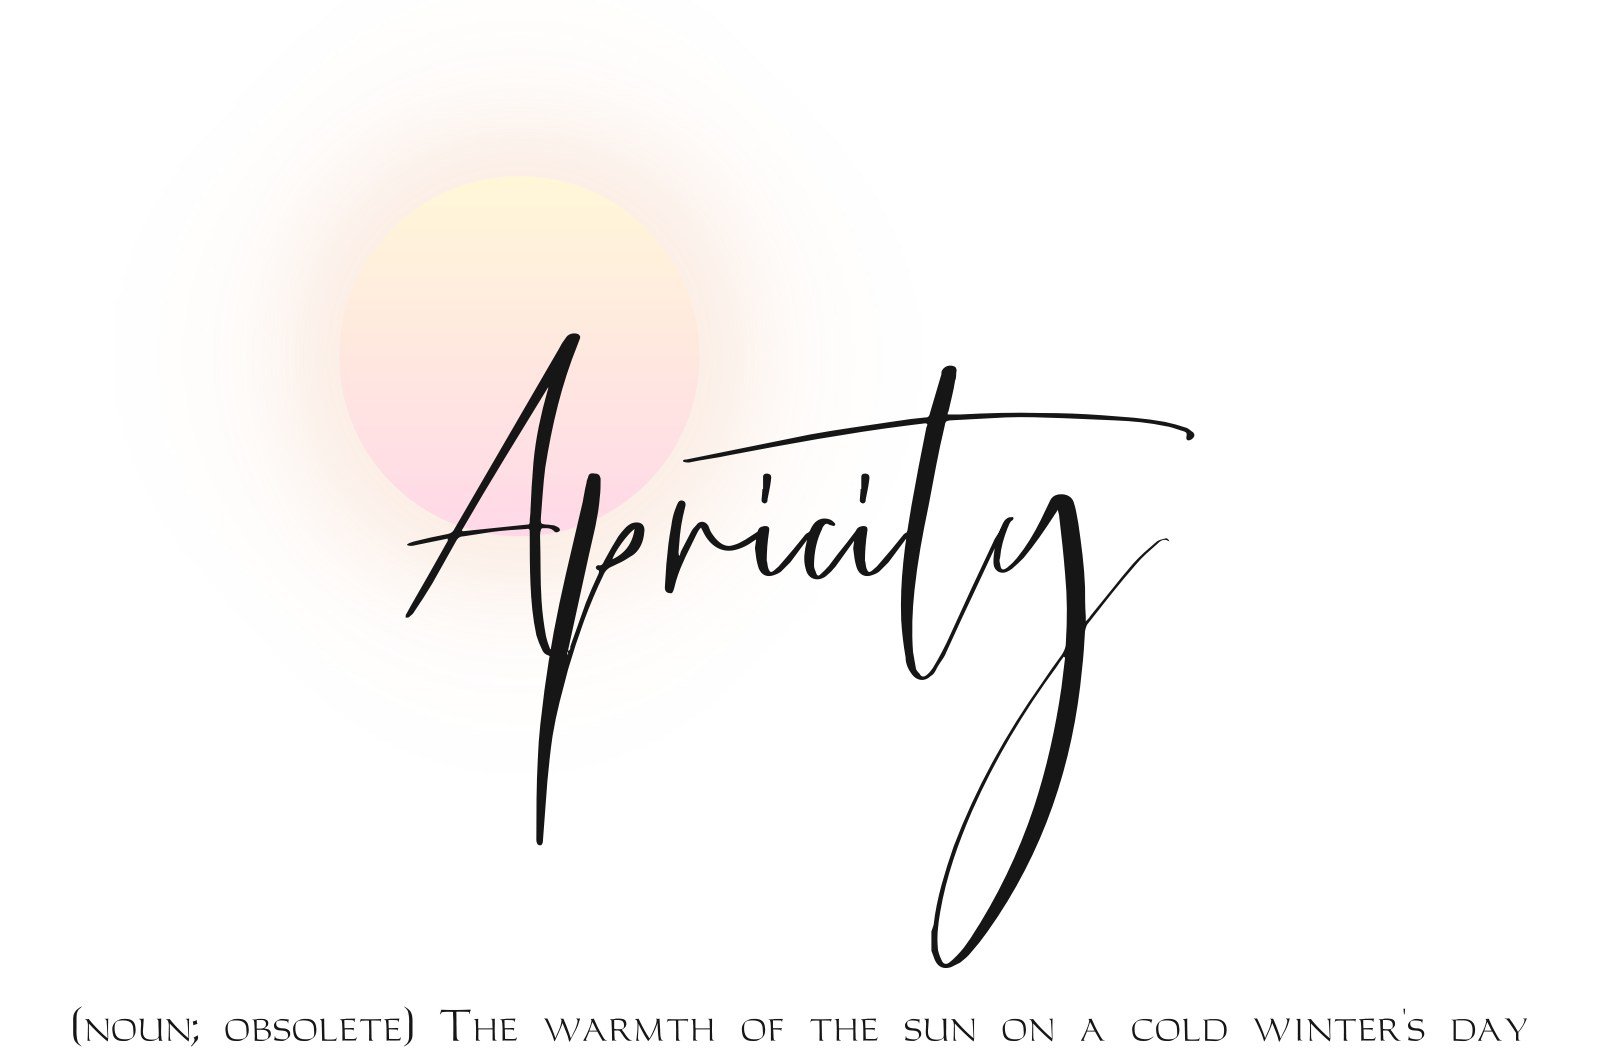 Apricity | (noun; obsolete) The warmth of the sun in a cold winter's day